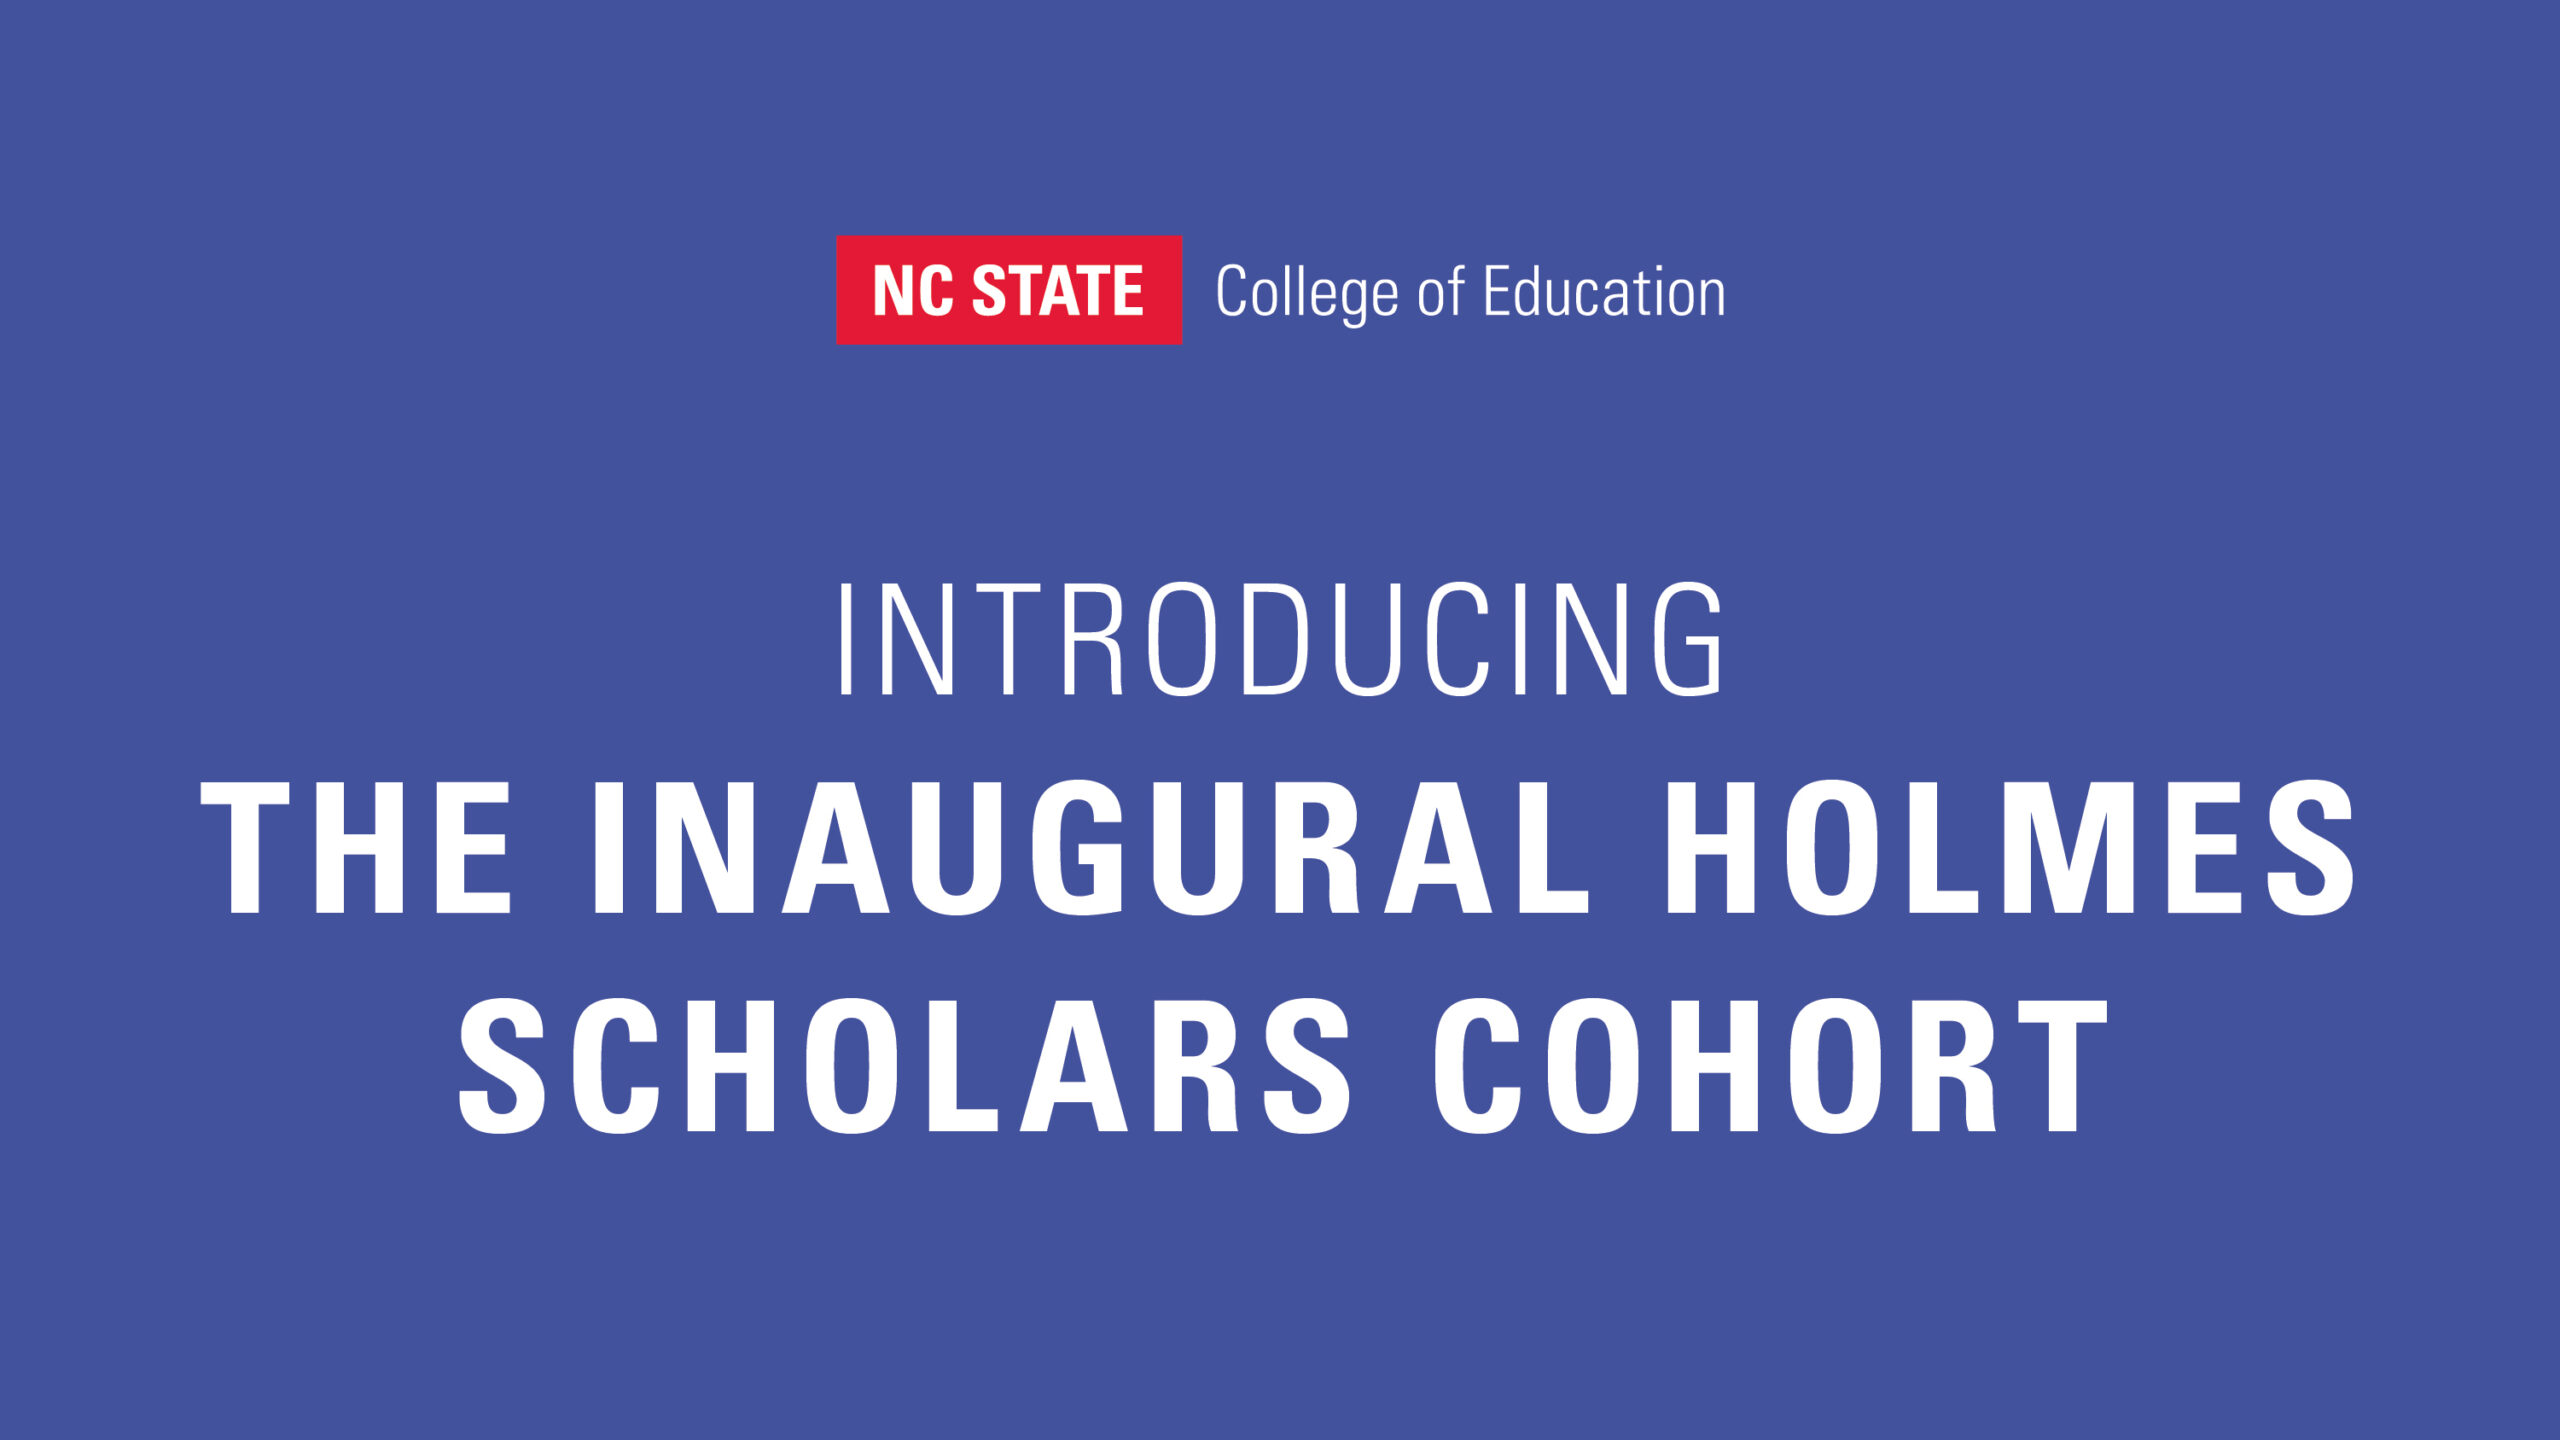 Introducing the Inaugural Holmes Scholars Cohort